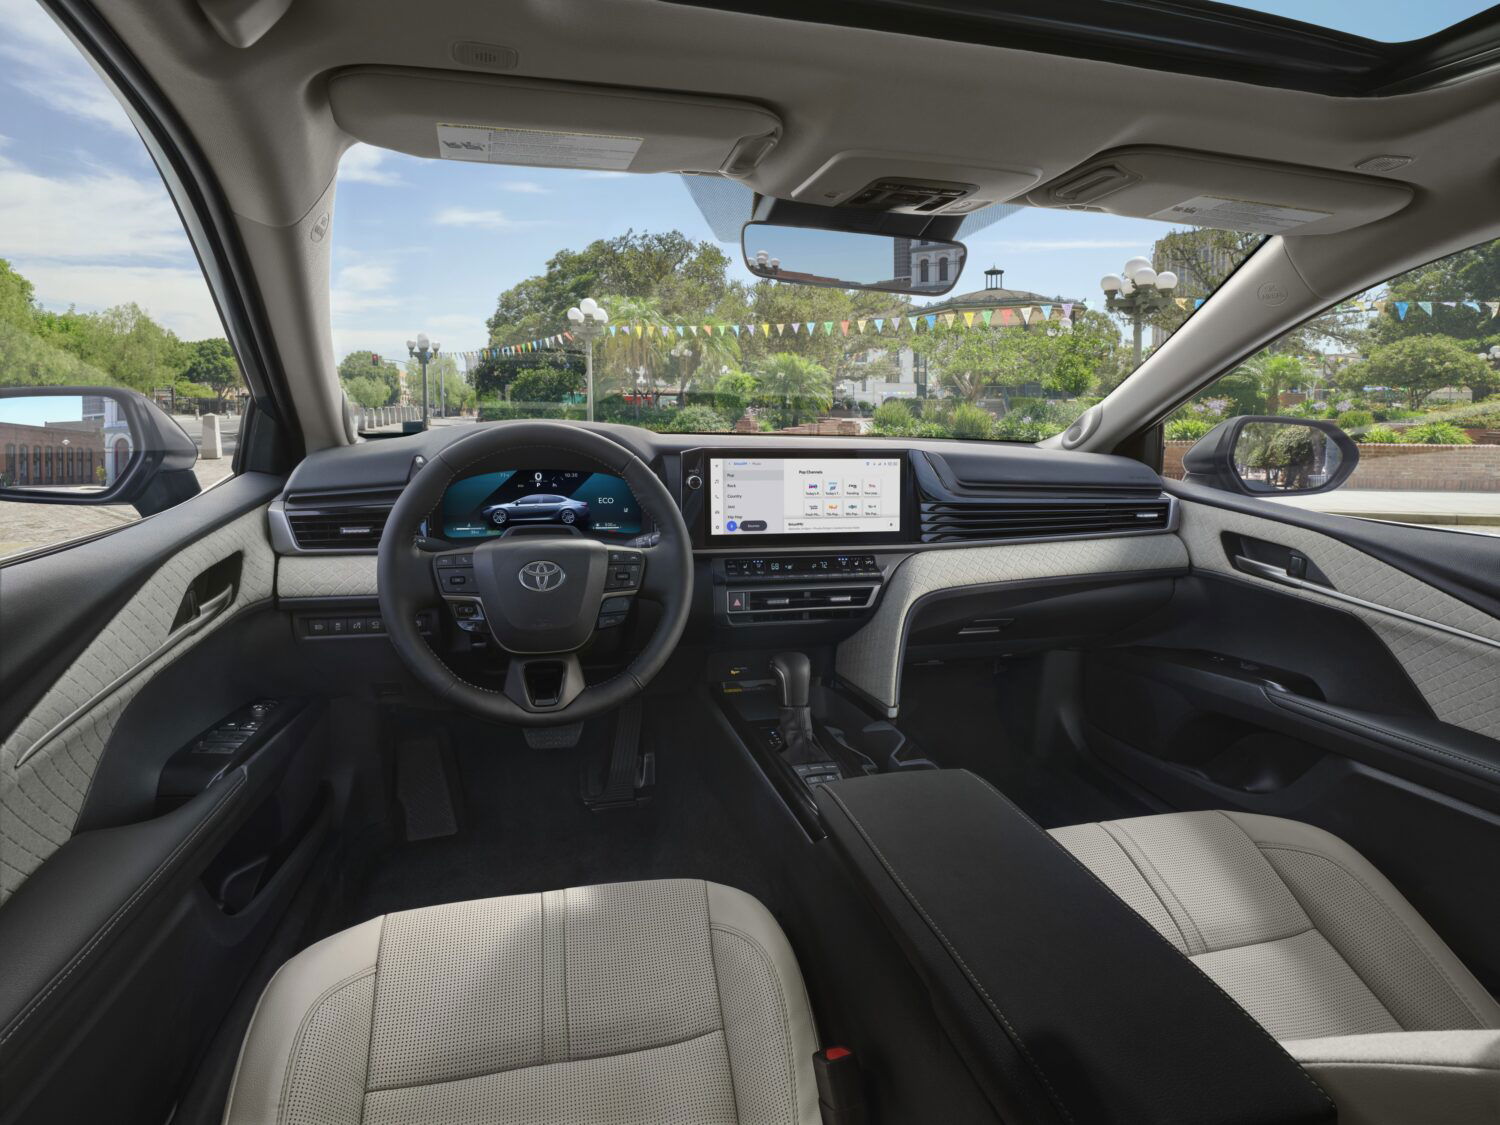 2025 Toyota Camry driver assistant features - XSE.